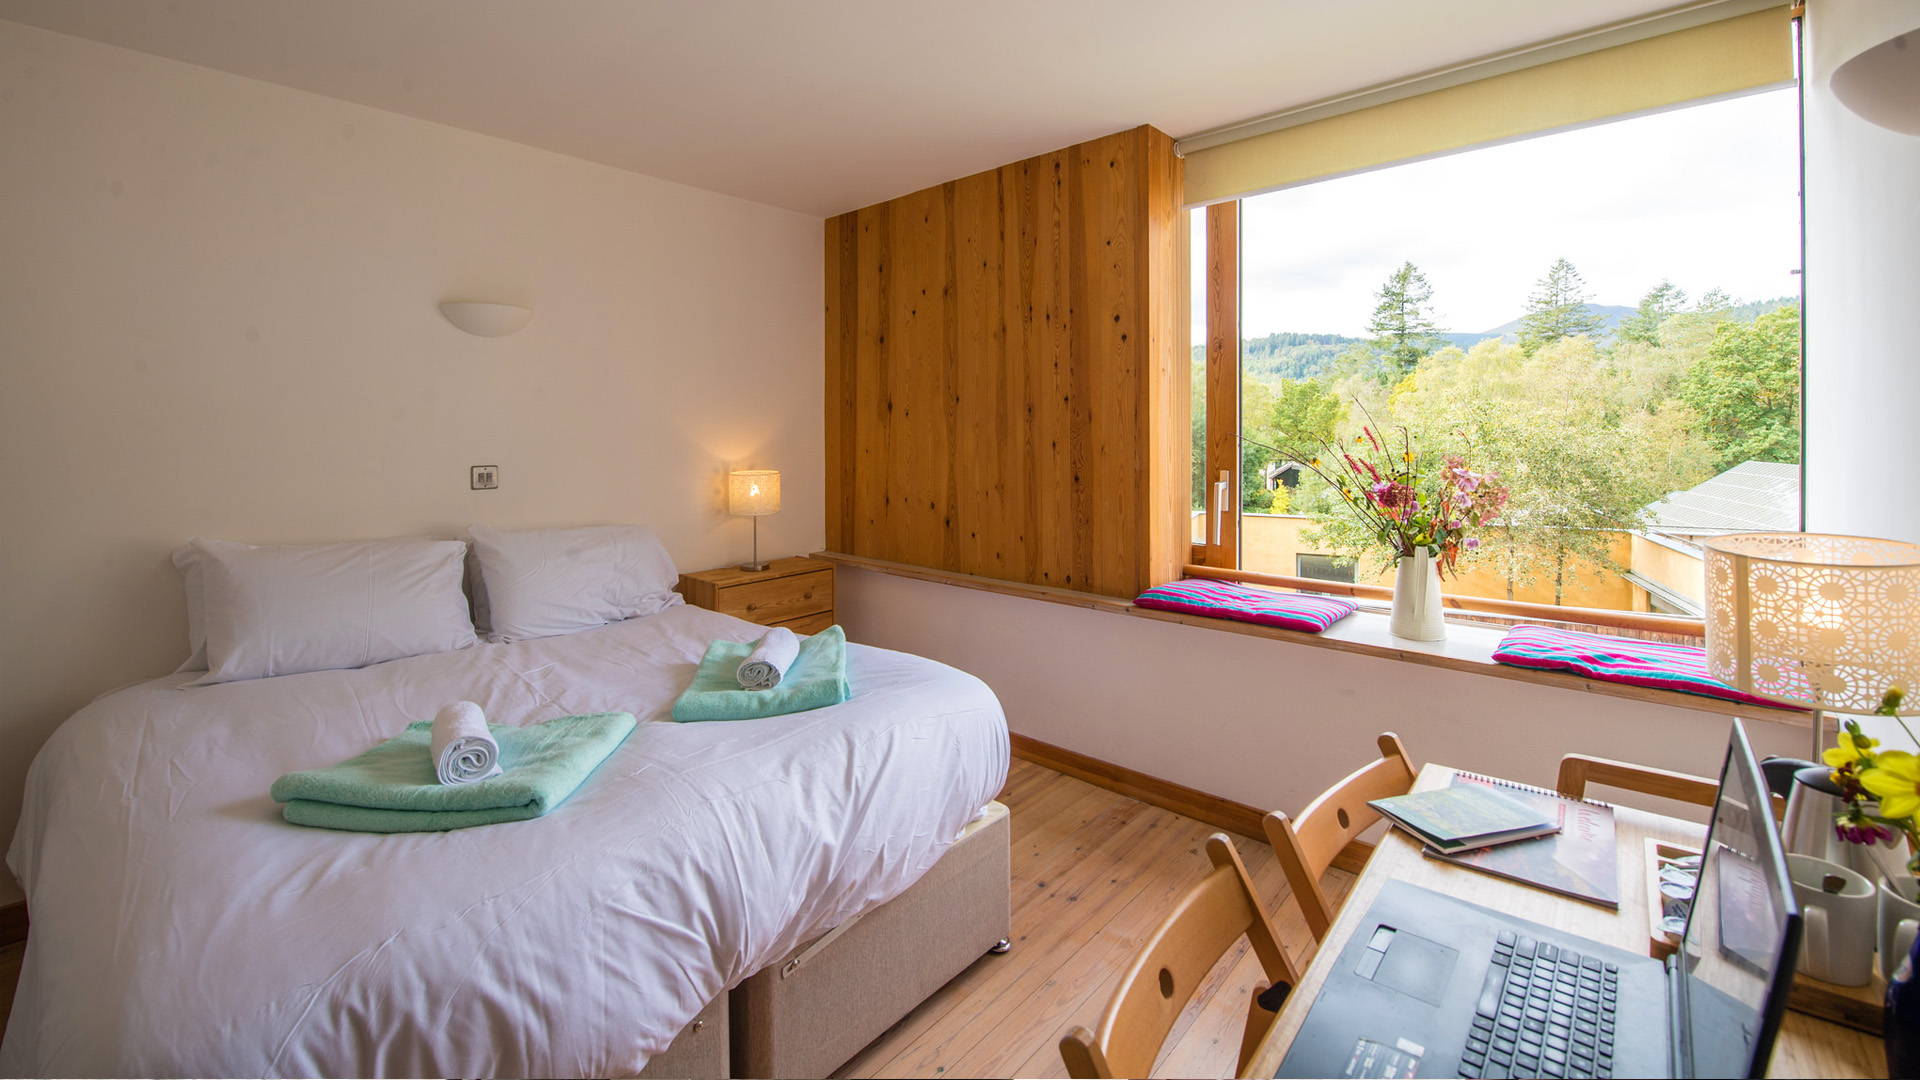 Accommodation in the Wales Institute for Sustainable Education (WISE)